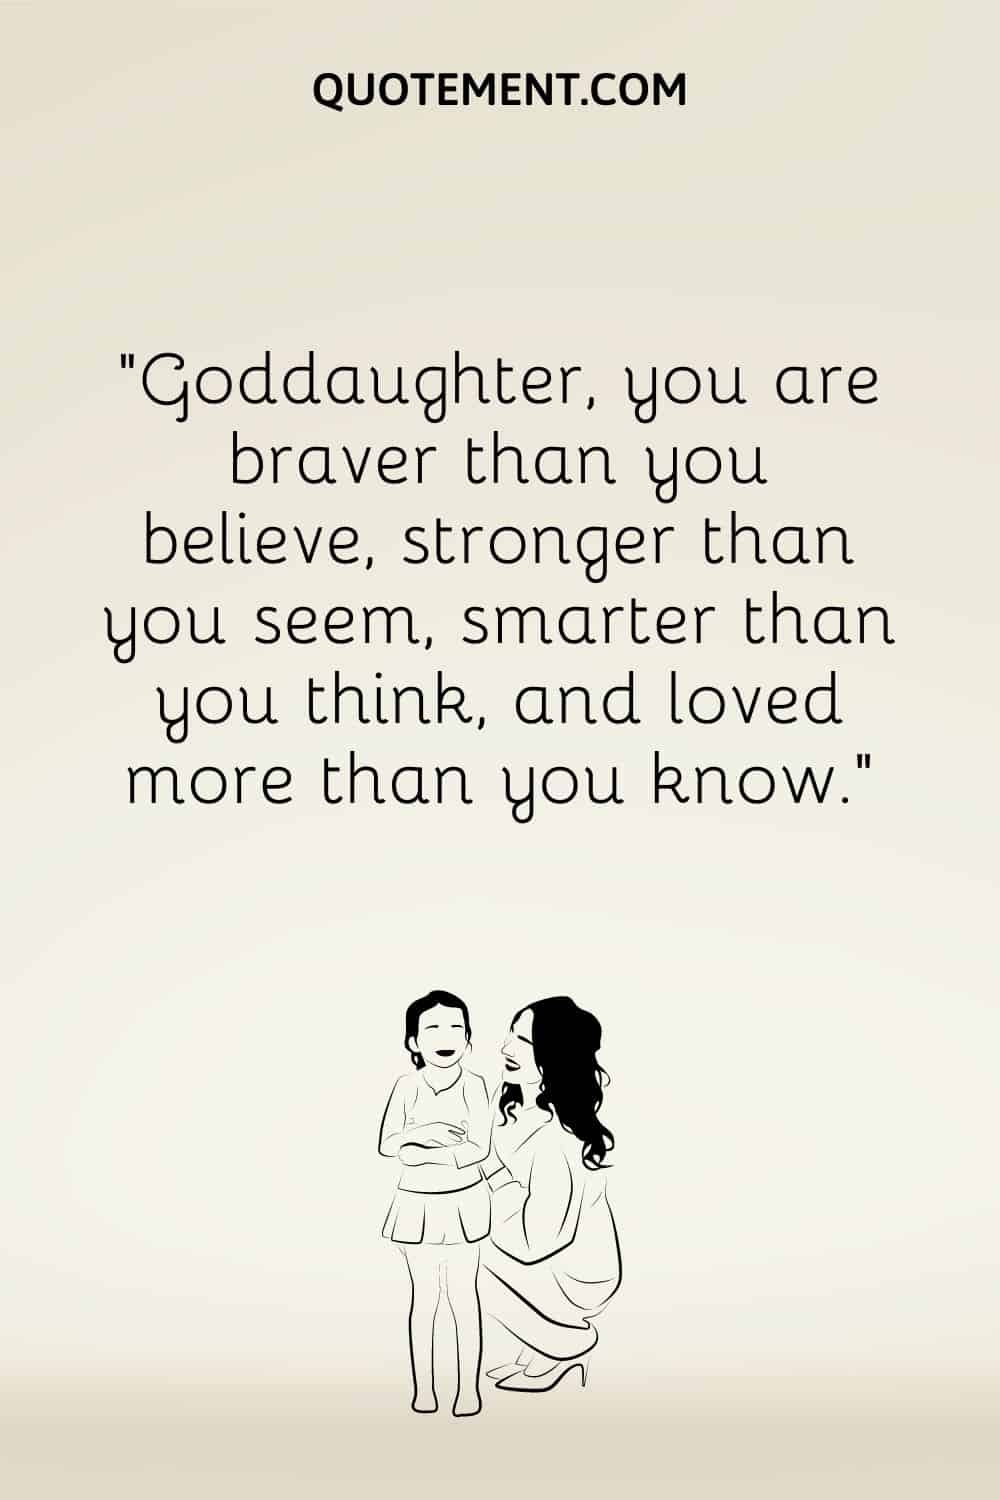 “Goddaughter, you are braver than you believe, stronger than you seem, smarter than you think, and loved more than you know.”